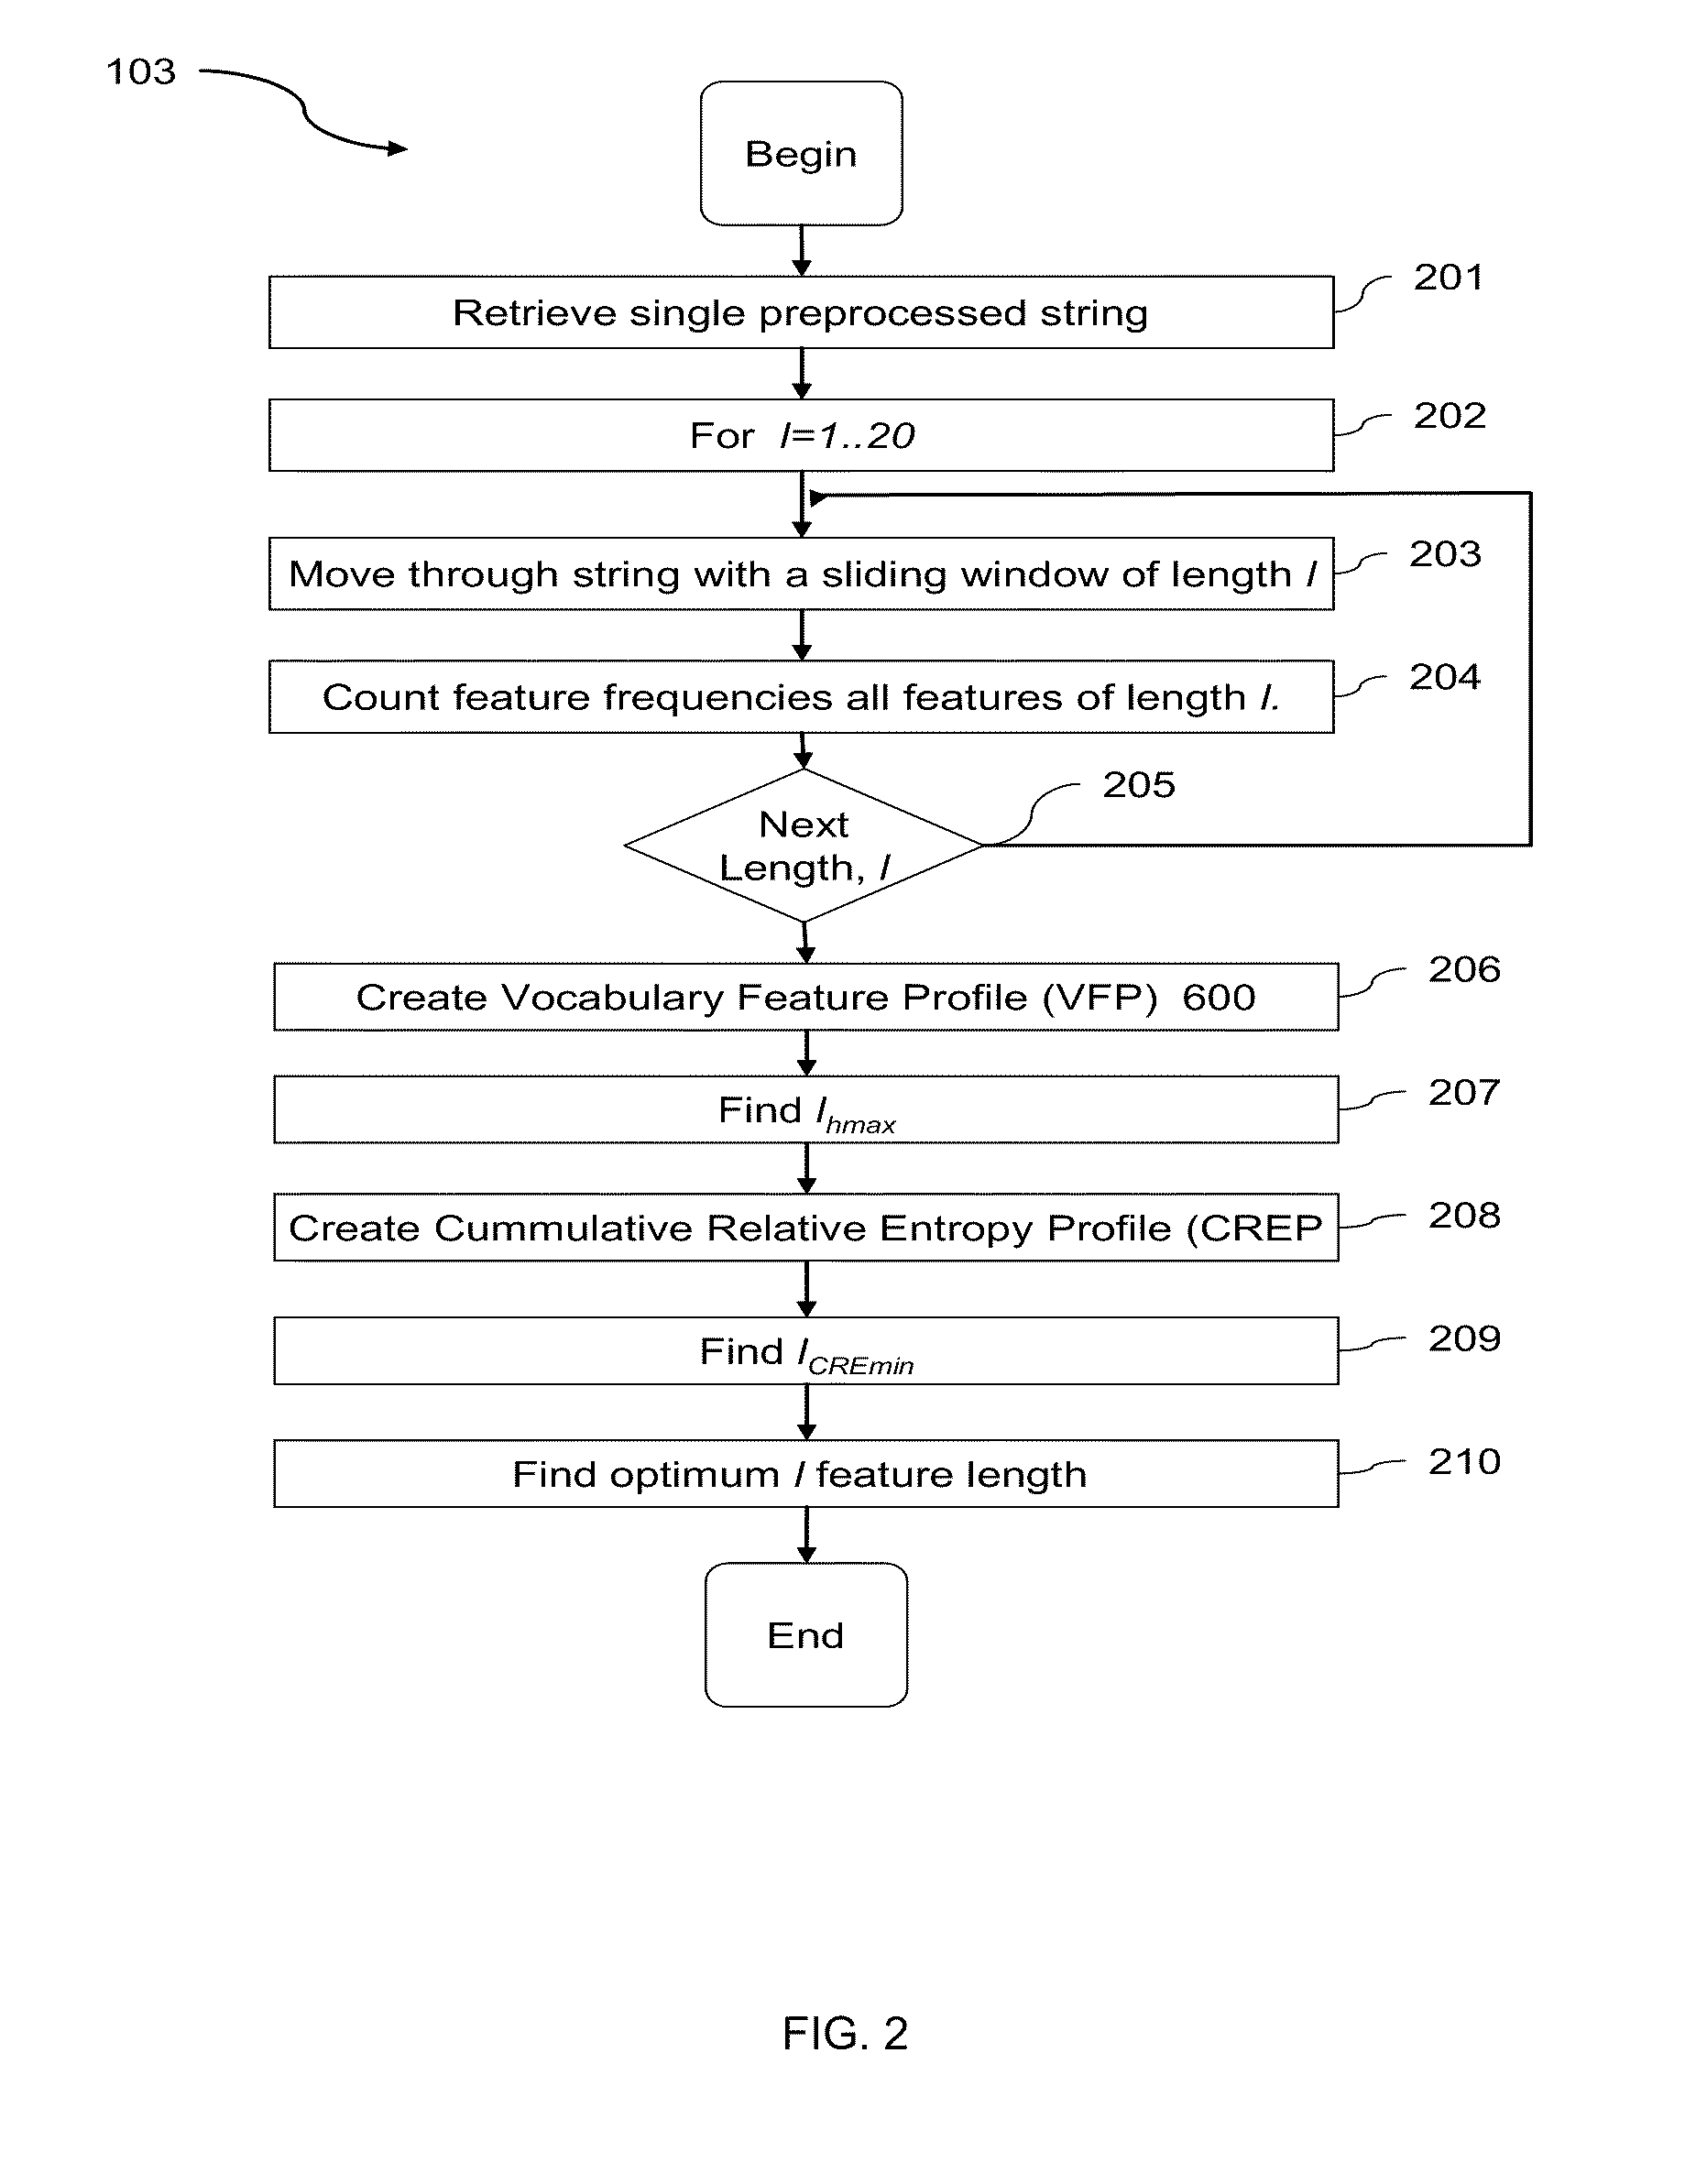 Computational Method for Comparing, Classifying, Indexing, and Cataloging of Electronically Stored Linear Information